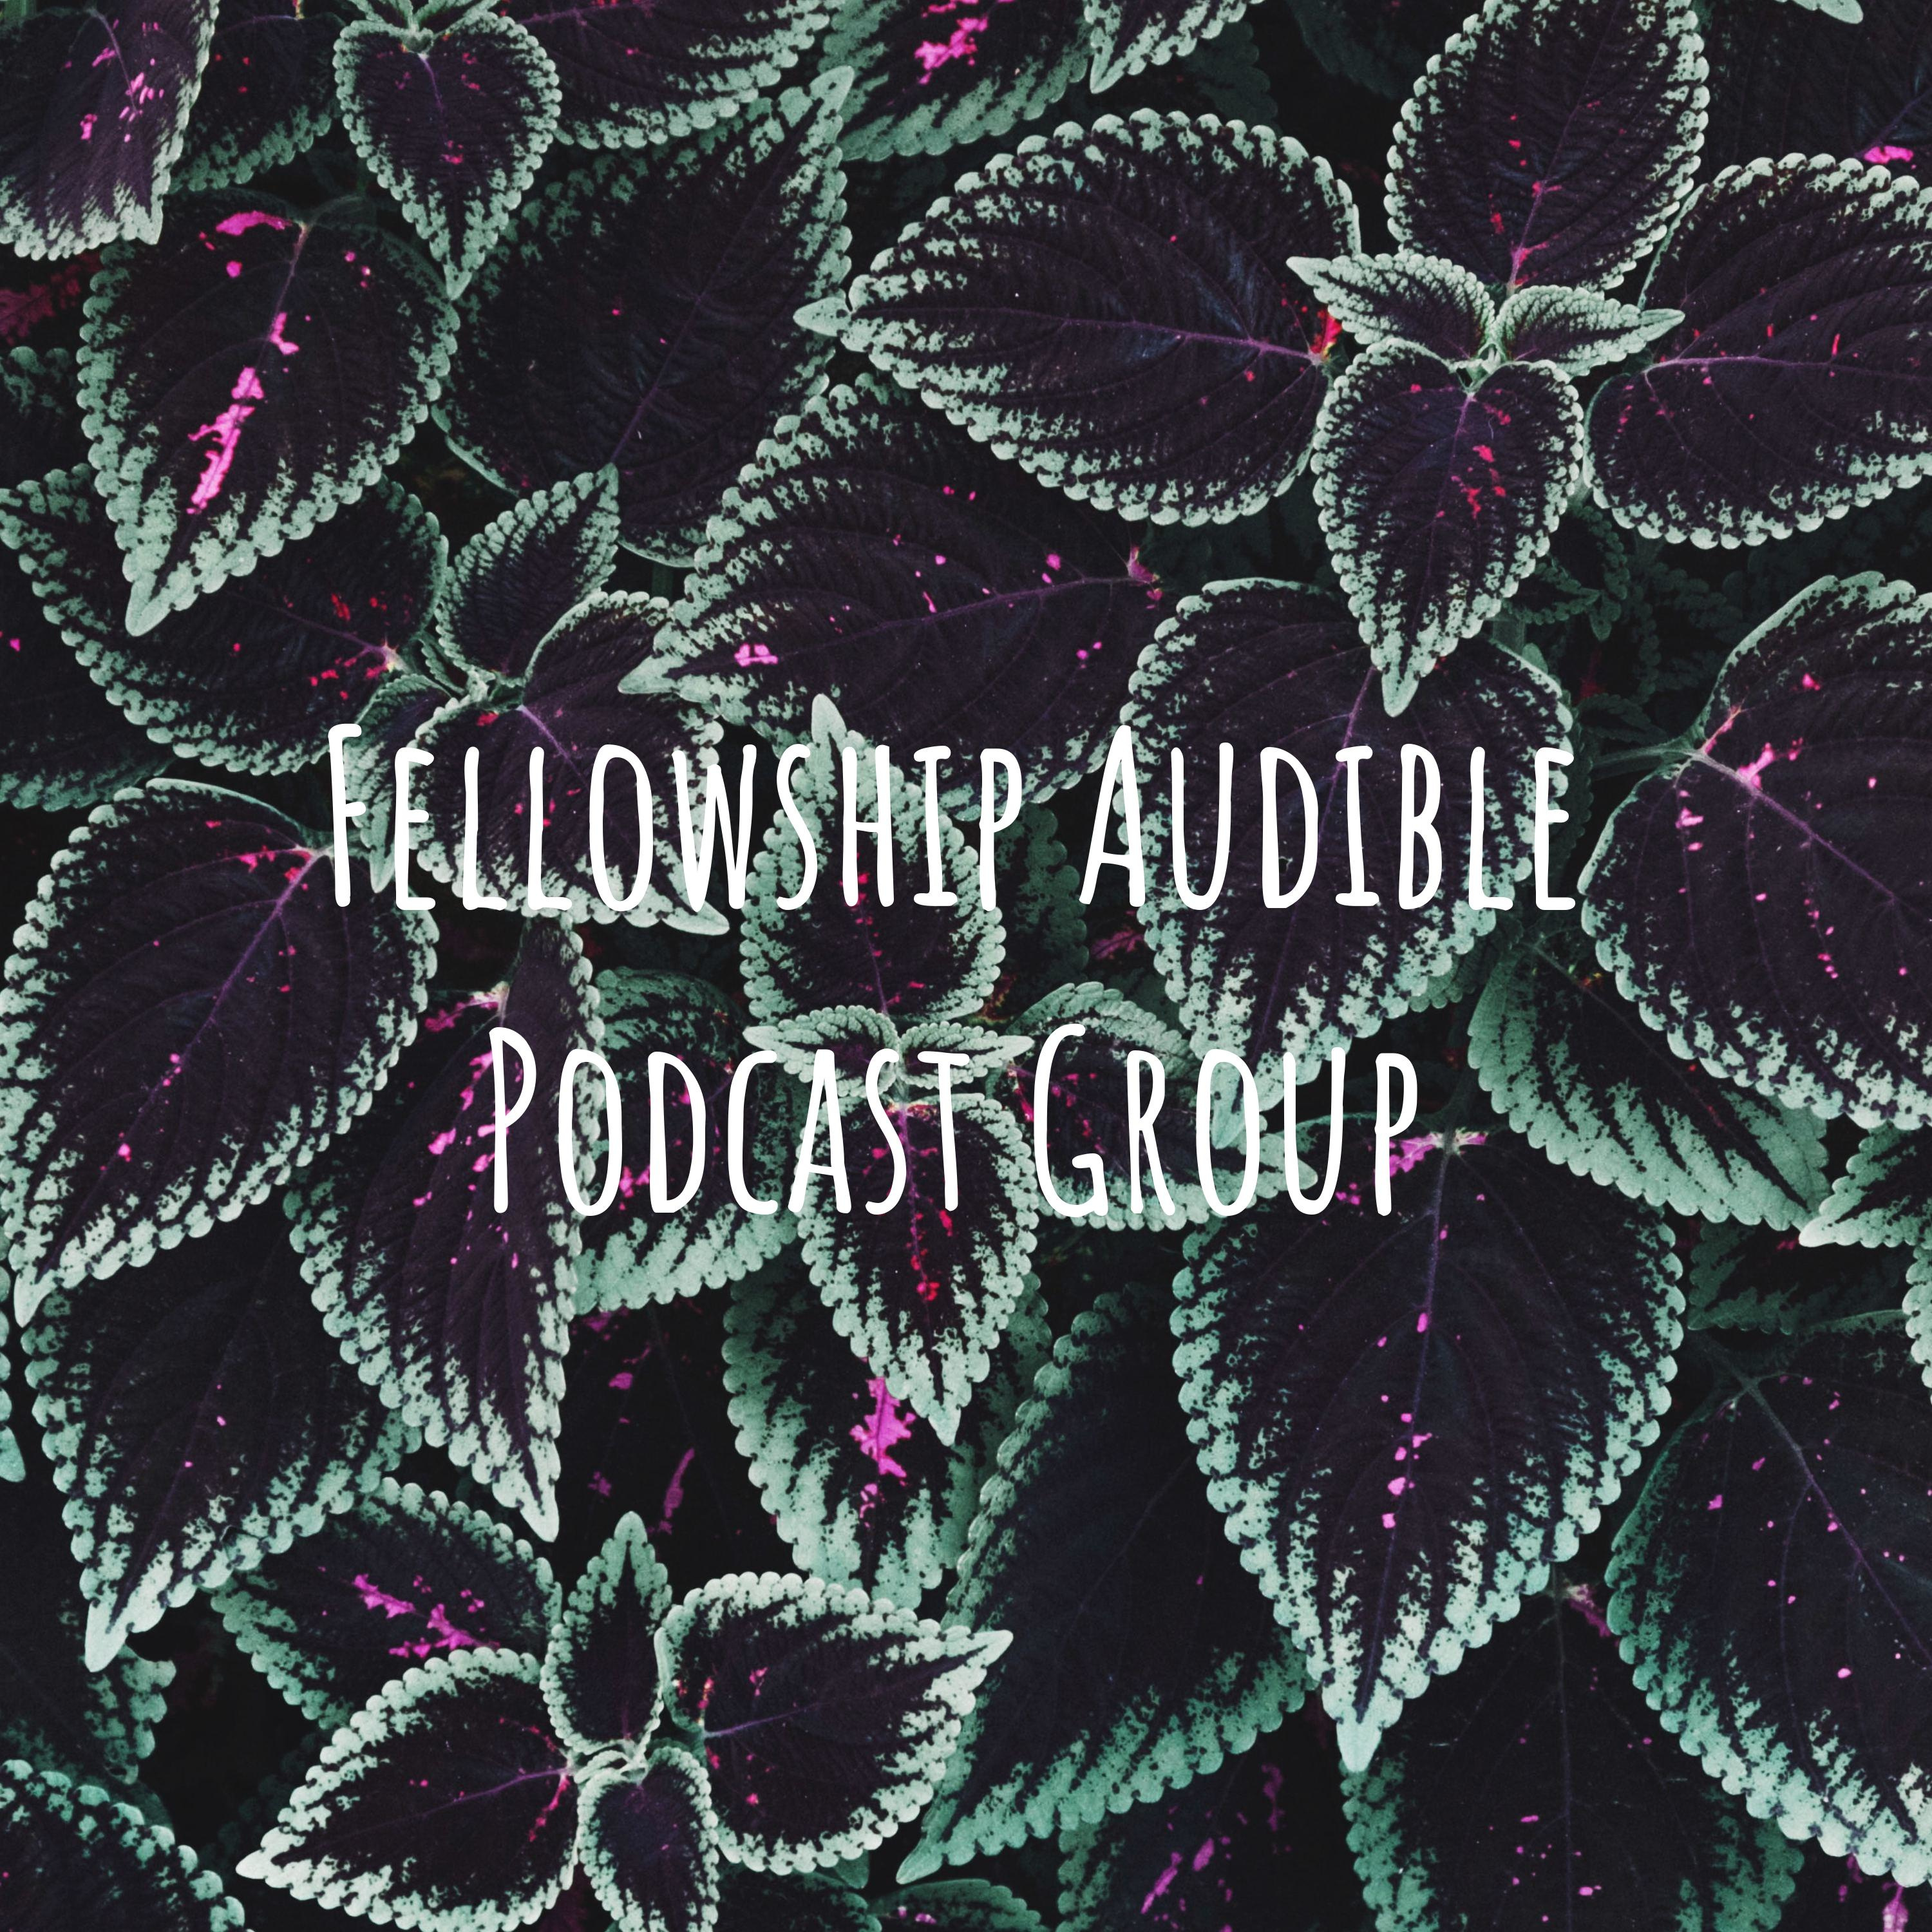 Fellowship Audio Podcast 28SEP19 | They're the Celebrities and We Love Them